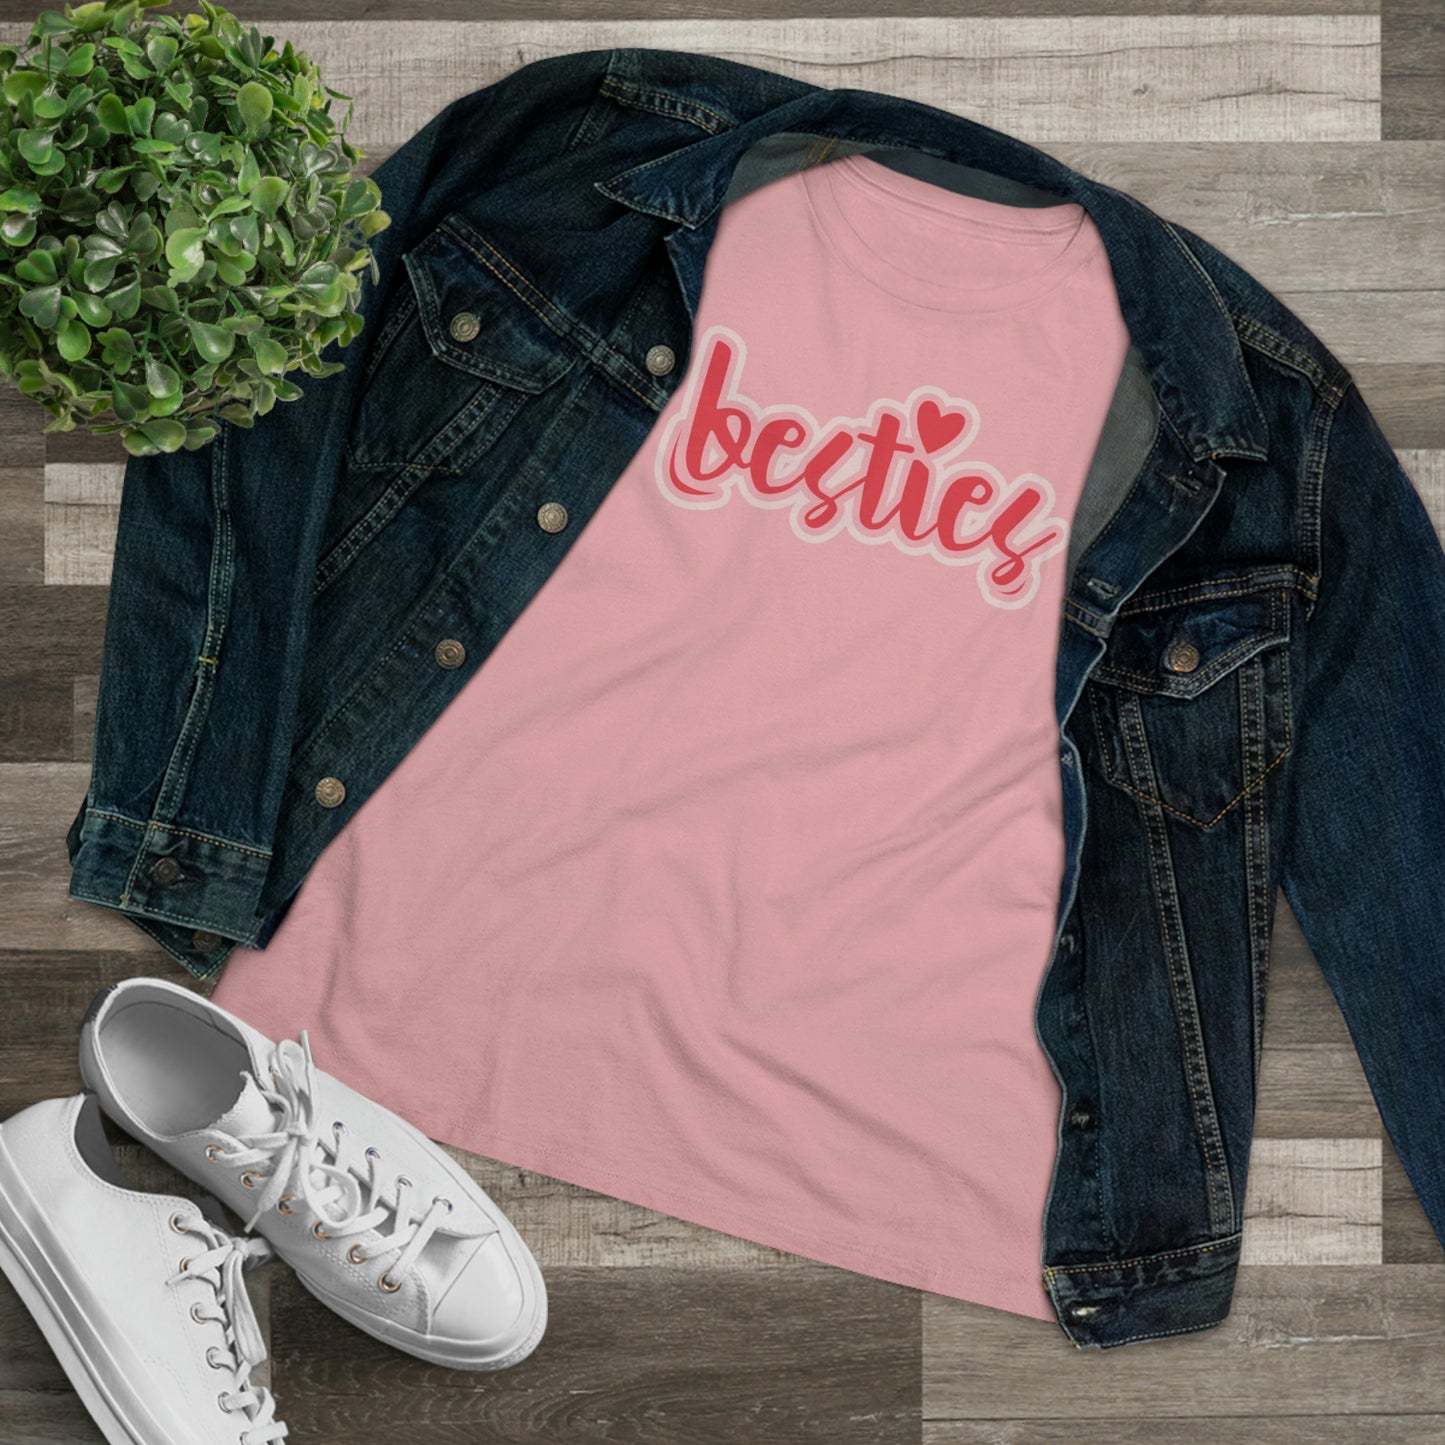 BESTIES SHIRTS, mommy and me, matching shirts, mother daughter shirts